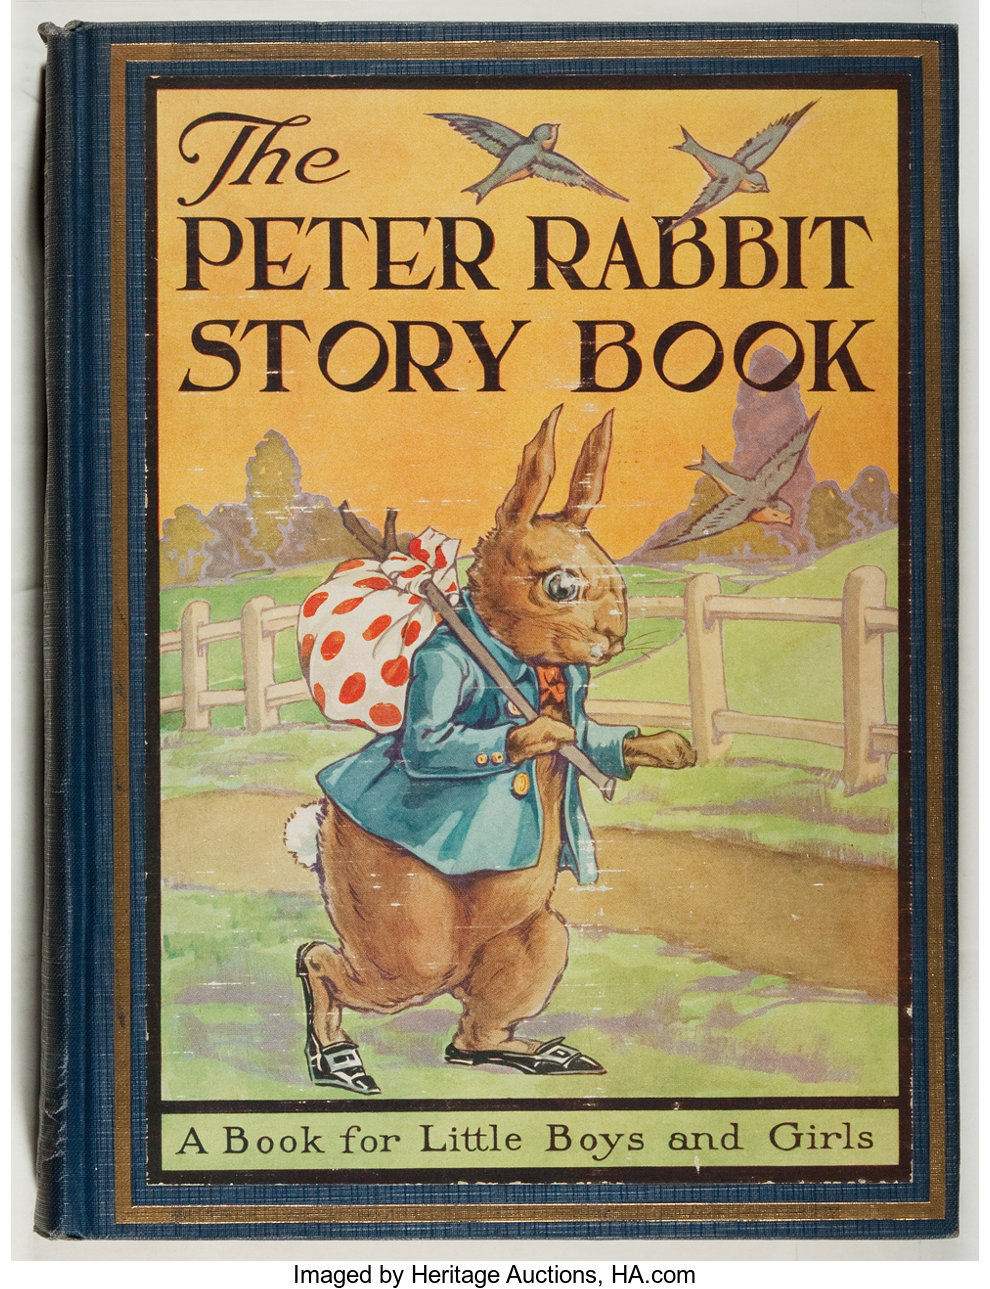 The Peter Rabbit Story Book book image